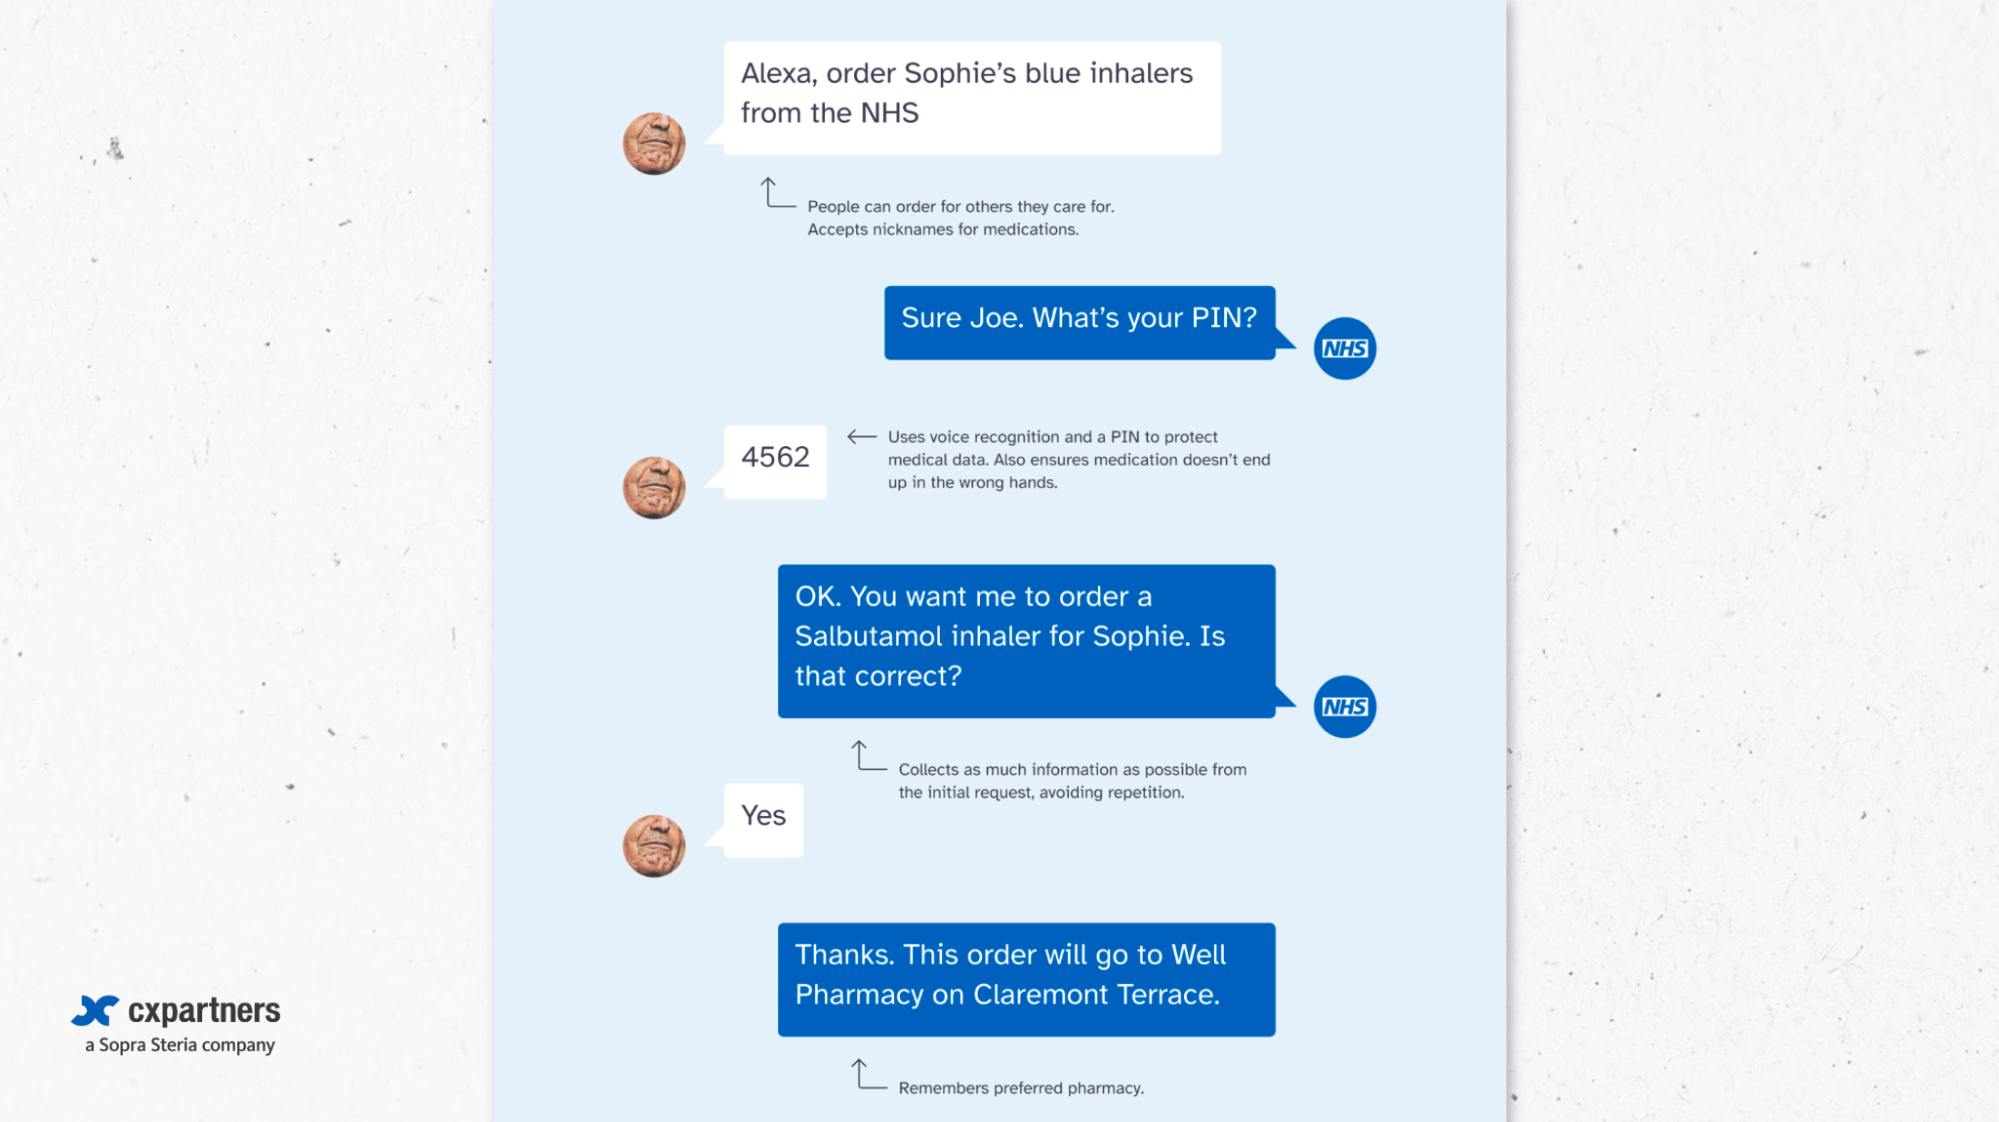 Screenshot of an prototype online conversation between the NHS and a user. It reads "Alexa, order Sophie's blue inhalers from the NHS", "Sure Joe. What's your PIN?", "4562", "Ok. You want me to order a Salbutamol inhaler for Sophie. Is that correct?", "Yes", "Thanks. This order will go to Well Pharmacy on Claremont Terrance." 